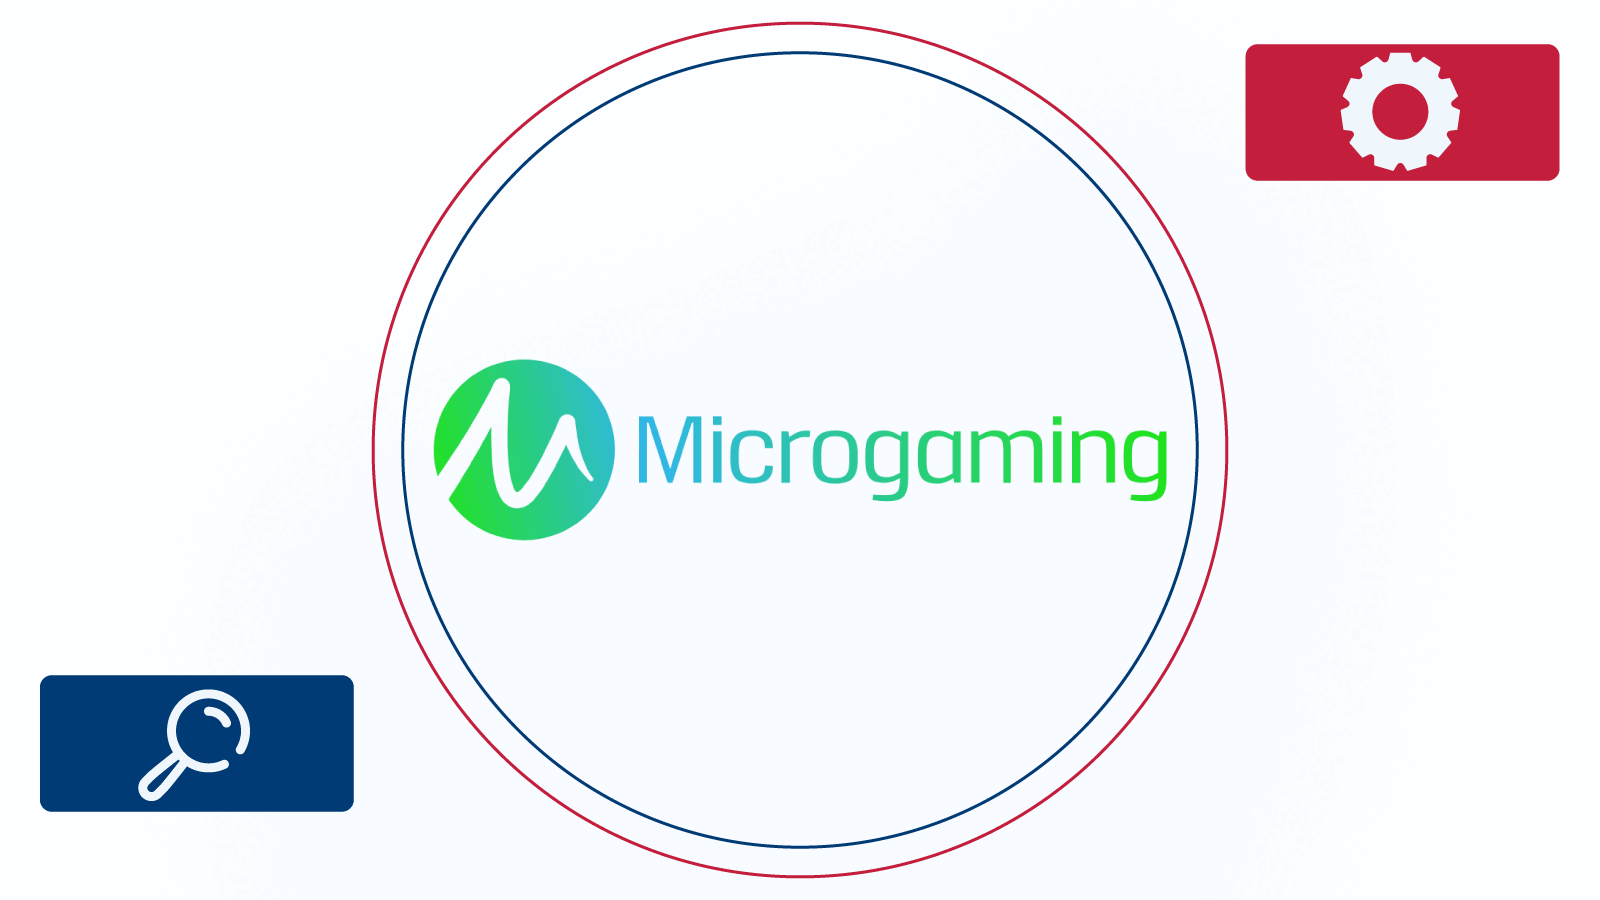 Microgaming Live essential facts